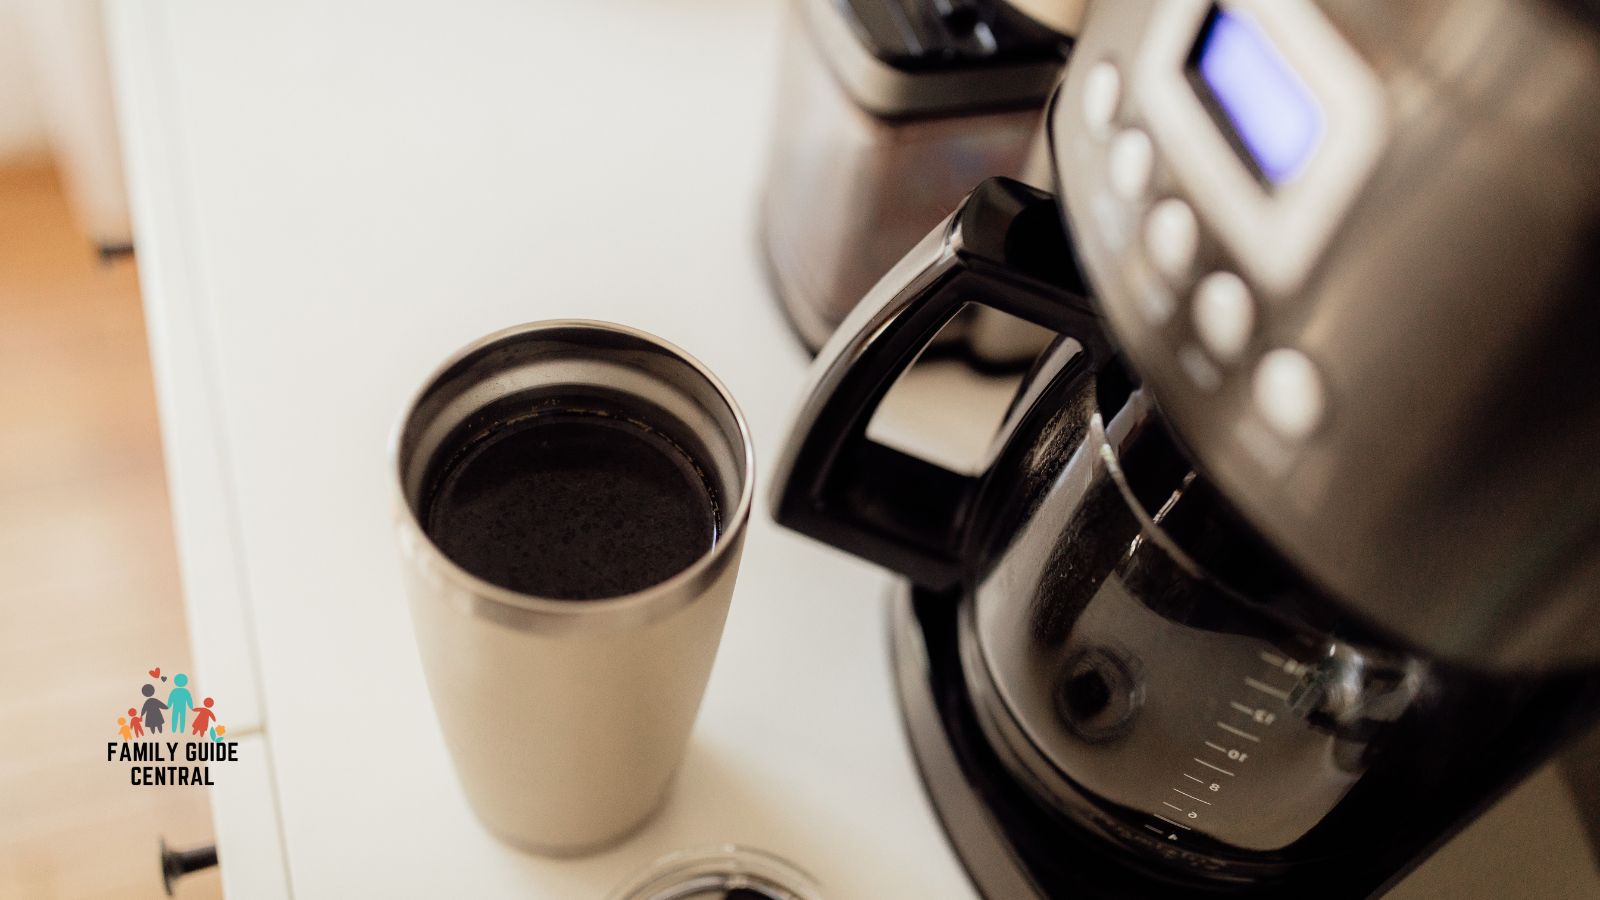 Cuisinart coffee maker possibly leaking - familyguidecentral.com